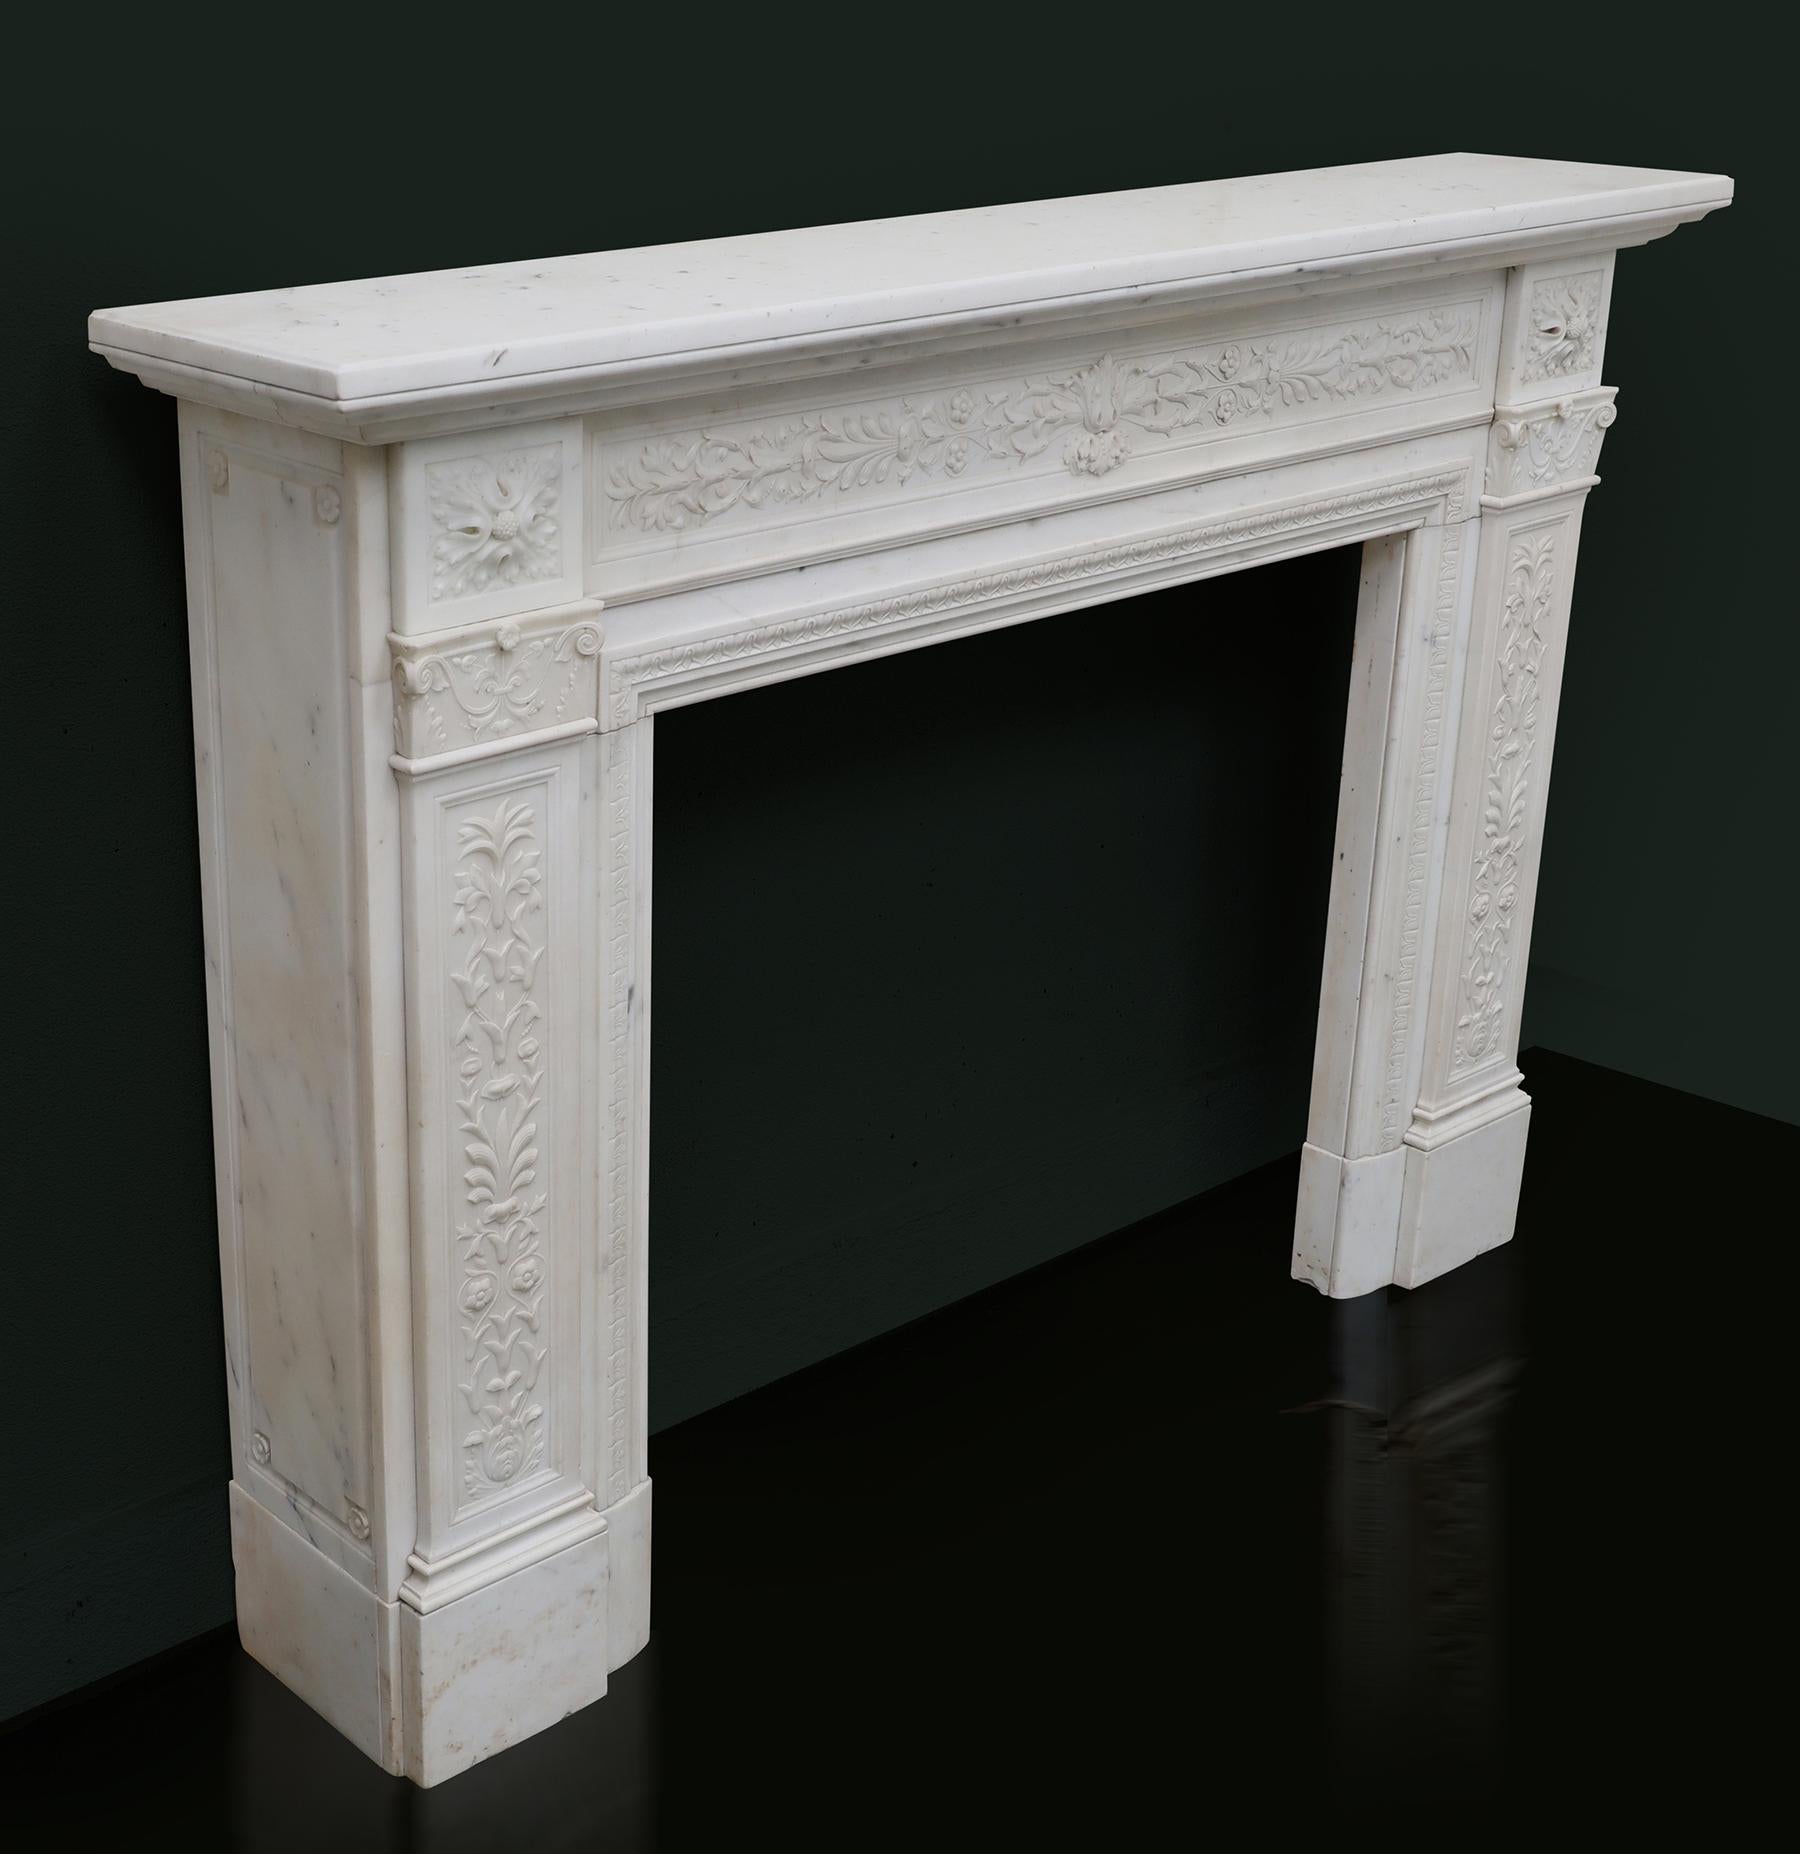 A magnificent finely carved statuary William IV chimneypiece. The moulded shelf sits over a finely carved continuous frieze with central acanthus bloom, harebells and foliage details. The foliate and berry corner blocks, set over scroll and flower